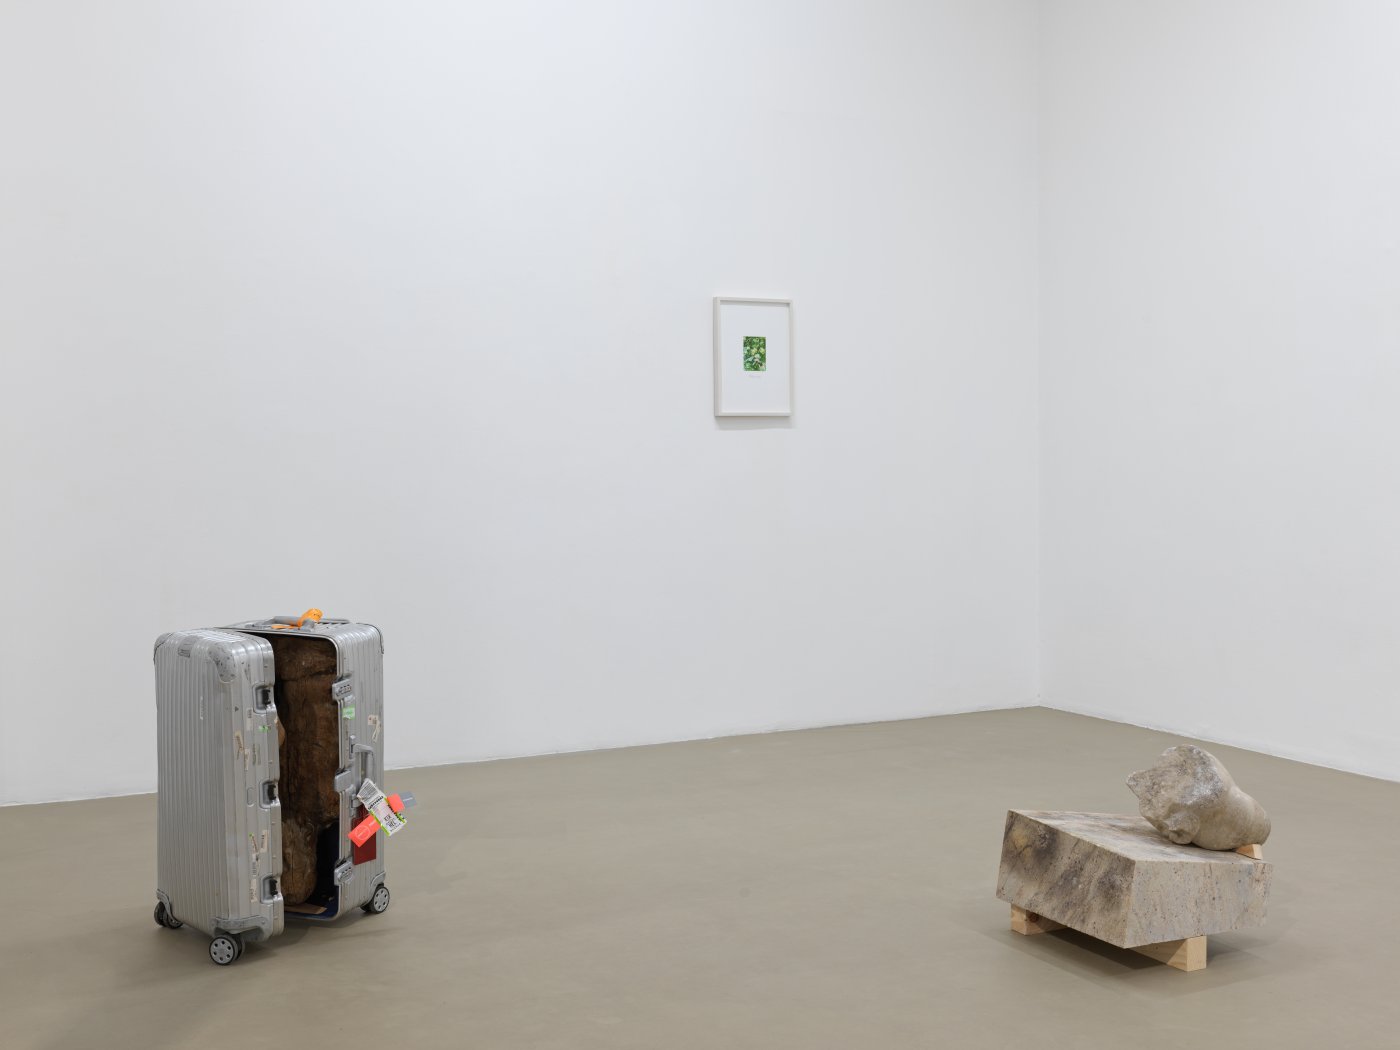 Installation image for Danh Vo, at Galerie Chantal Crousel